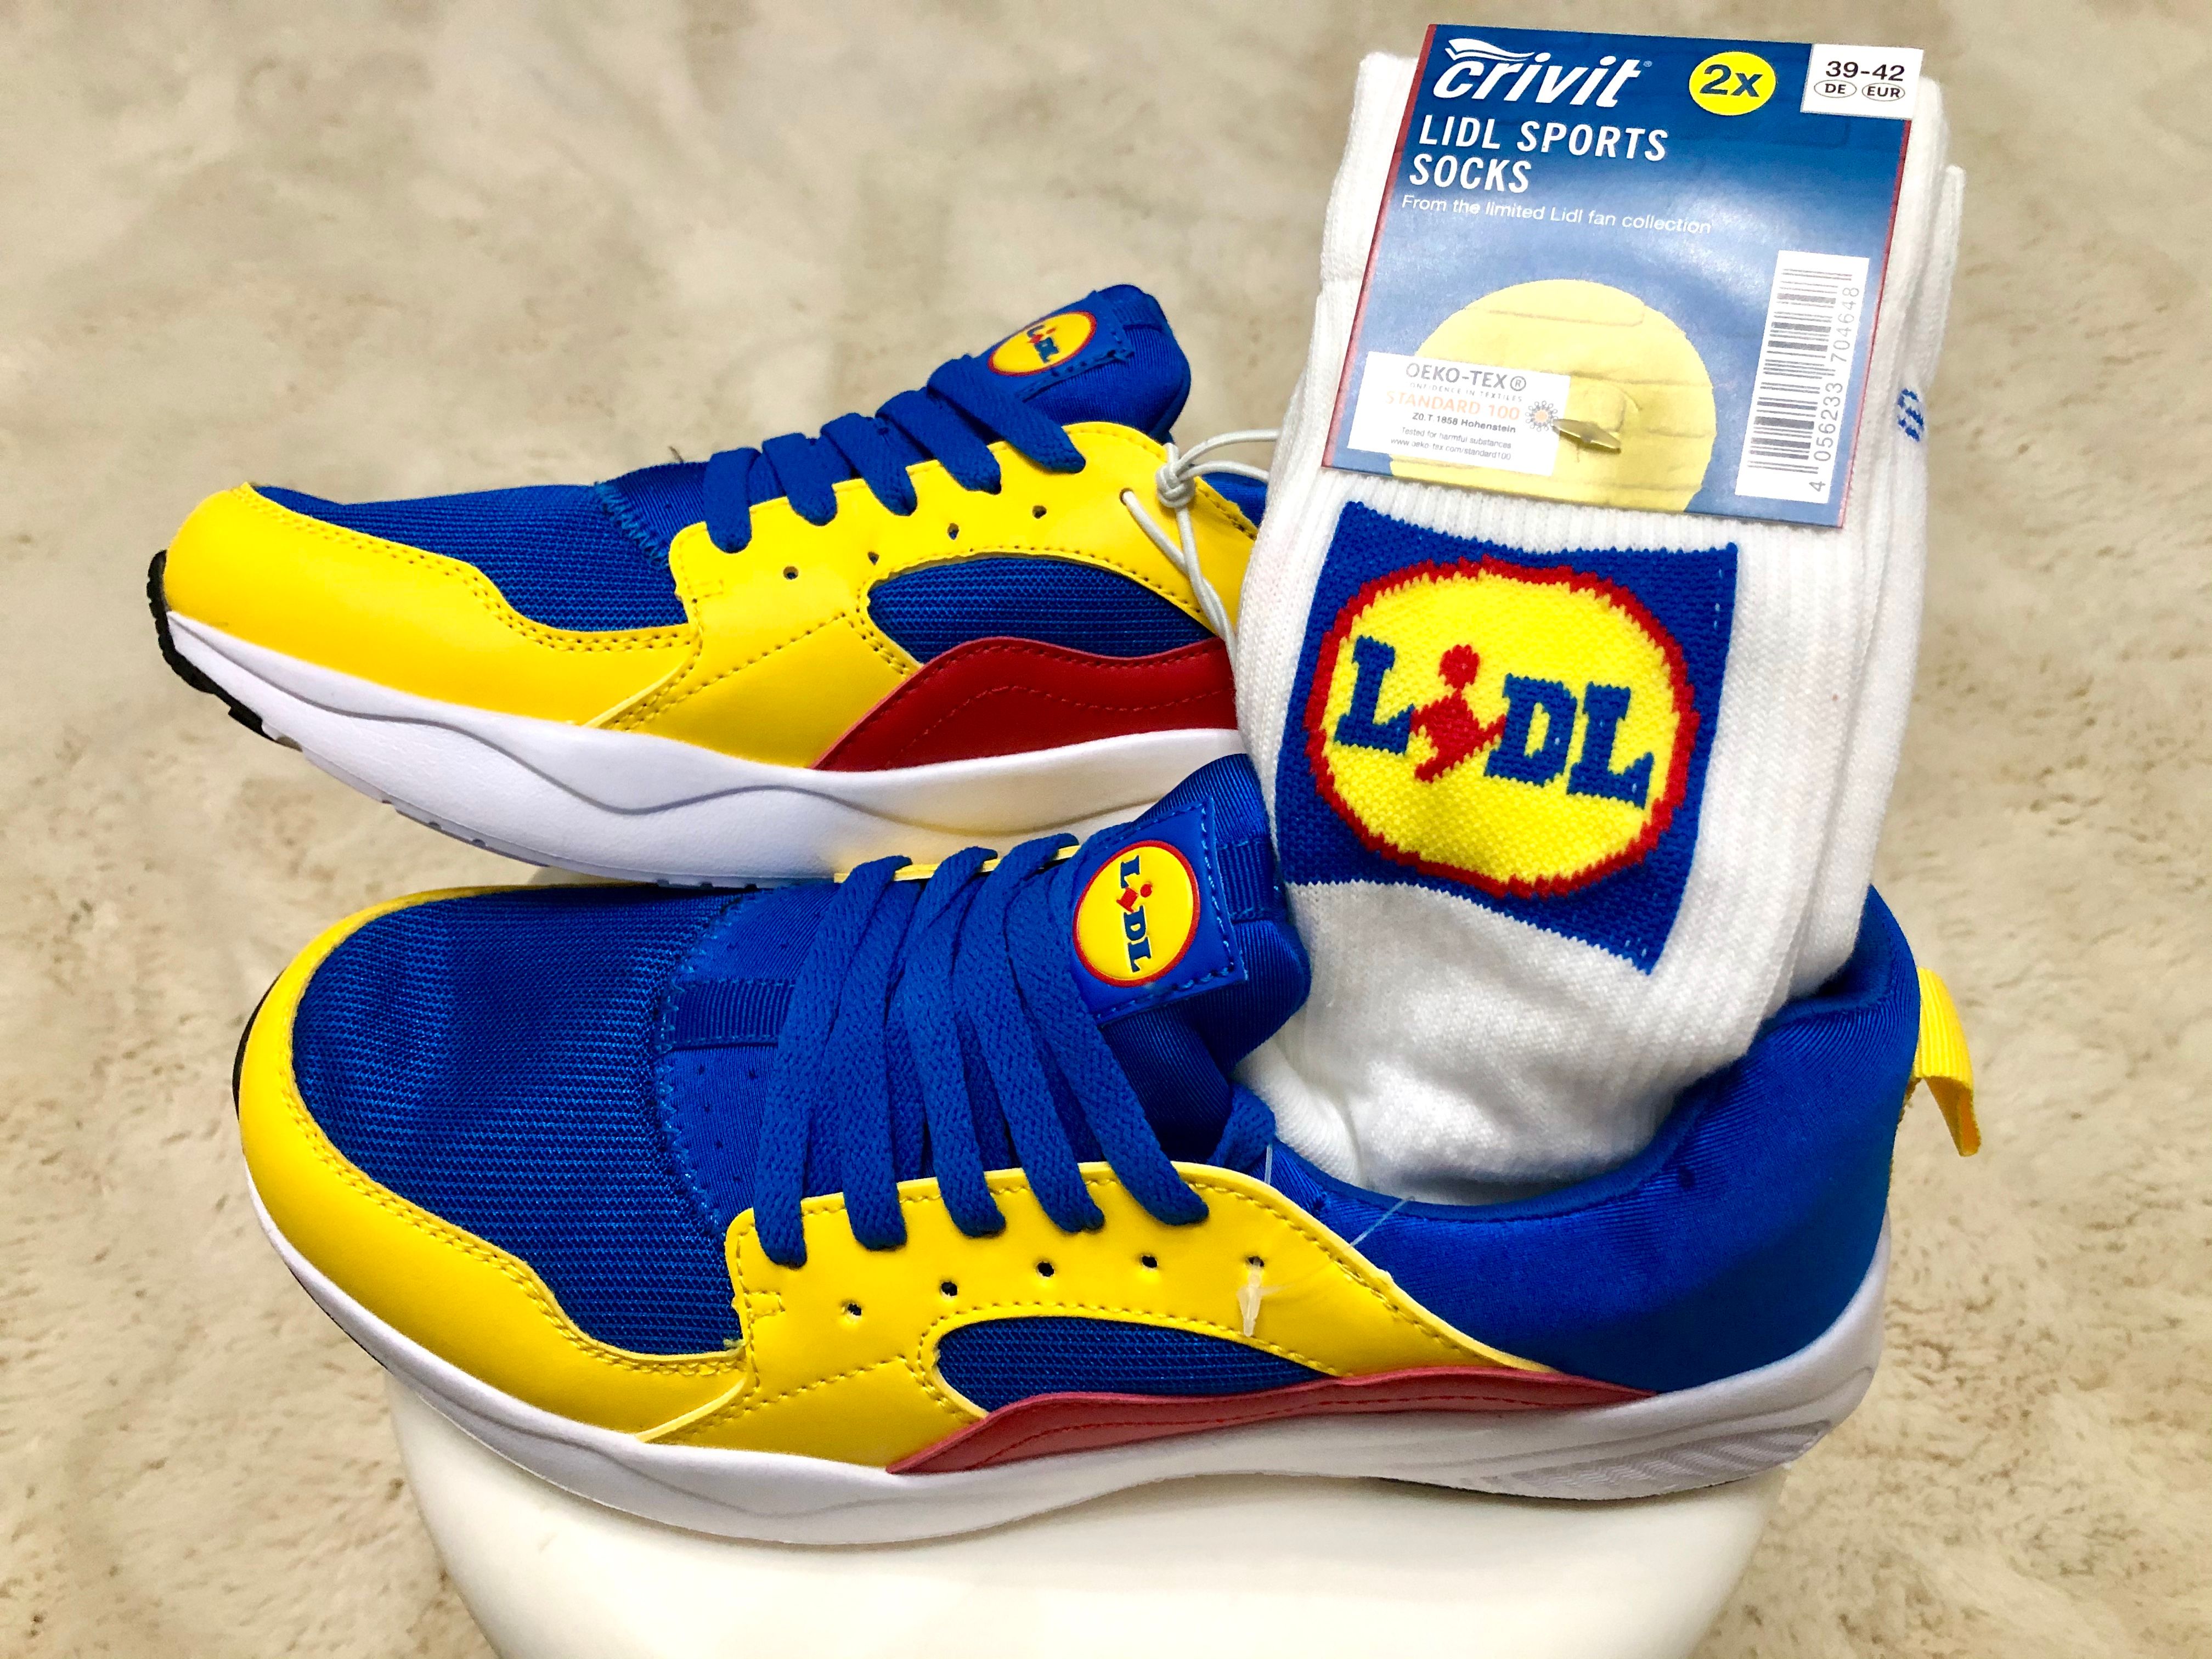 New Women Men's Lidl Unisex Sneakers T37 (Size 4) Limited Edition